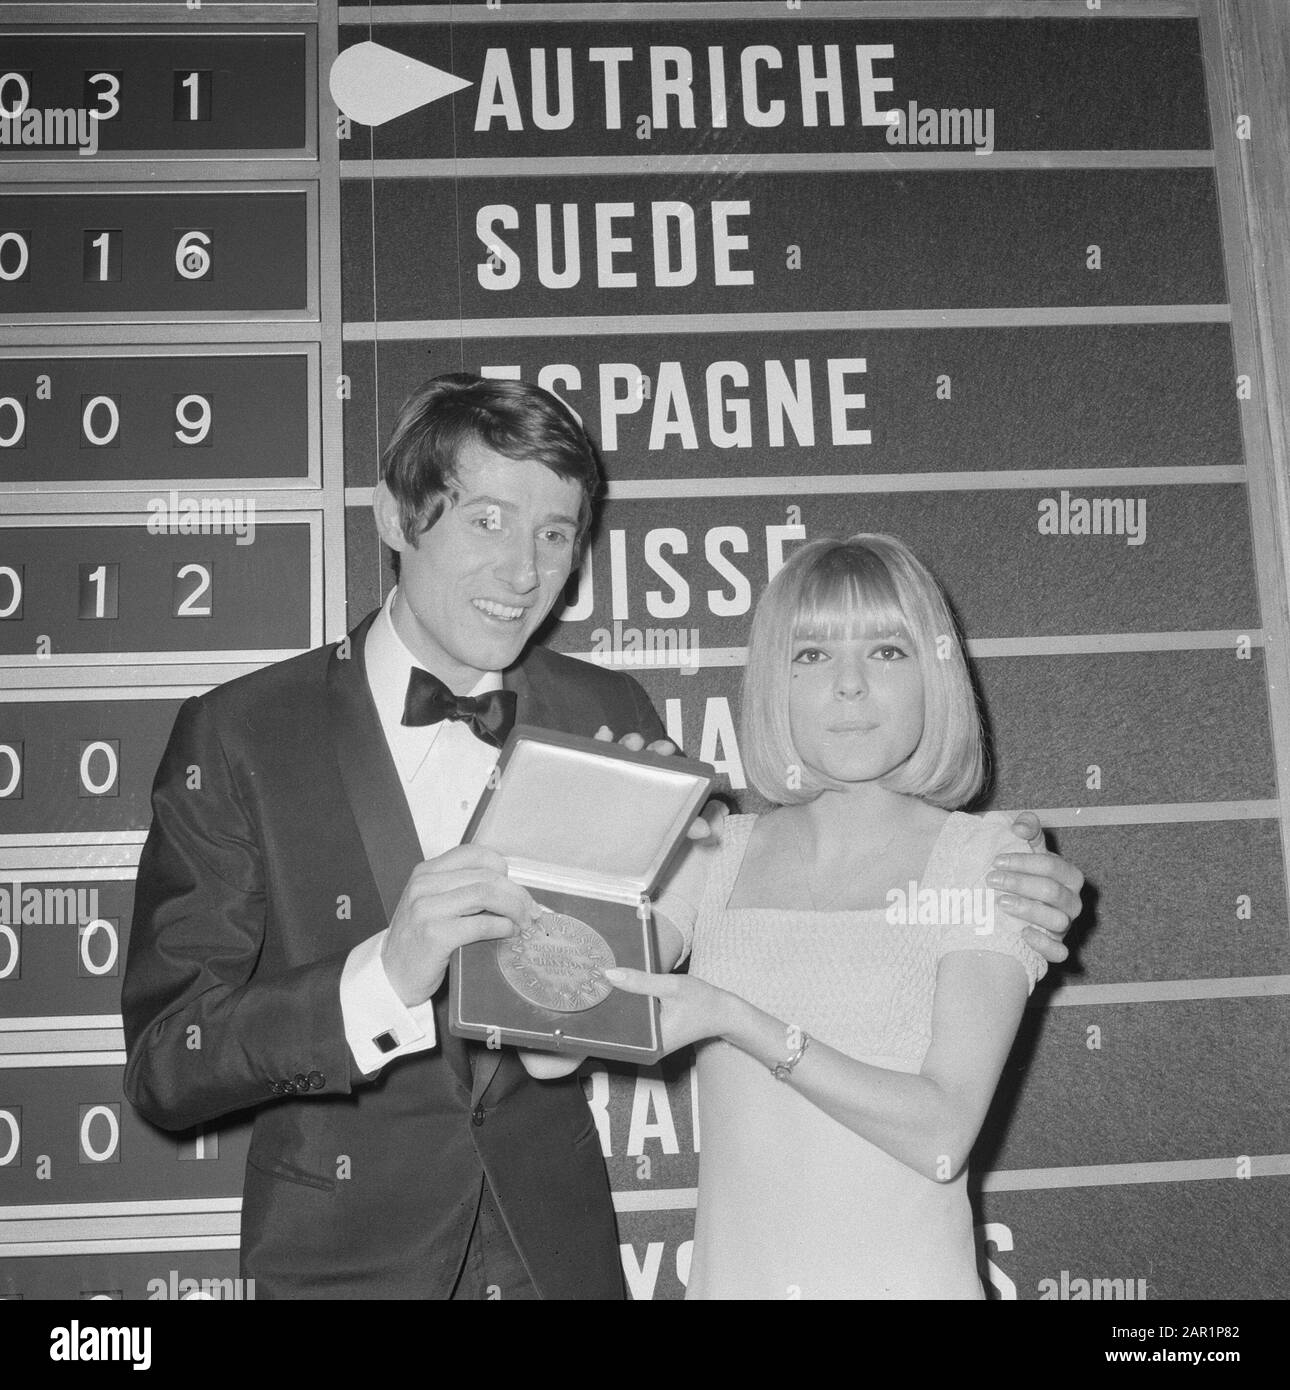 Eurovision Song Contest 1966 in Luxembourg. The winner Udo Jürgens with the  winner of 1965 France Gall Date: 6 March 1966 Location: Luxembourg  Keywords: artists, music, song festivals, singers, singers Personal name: